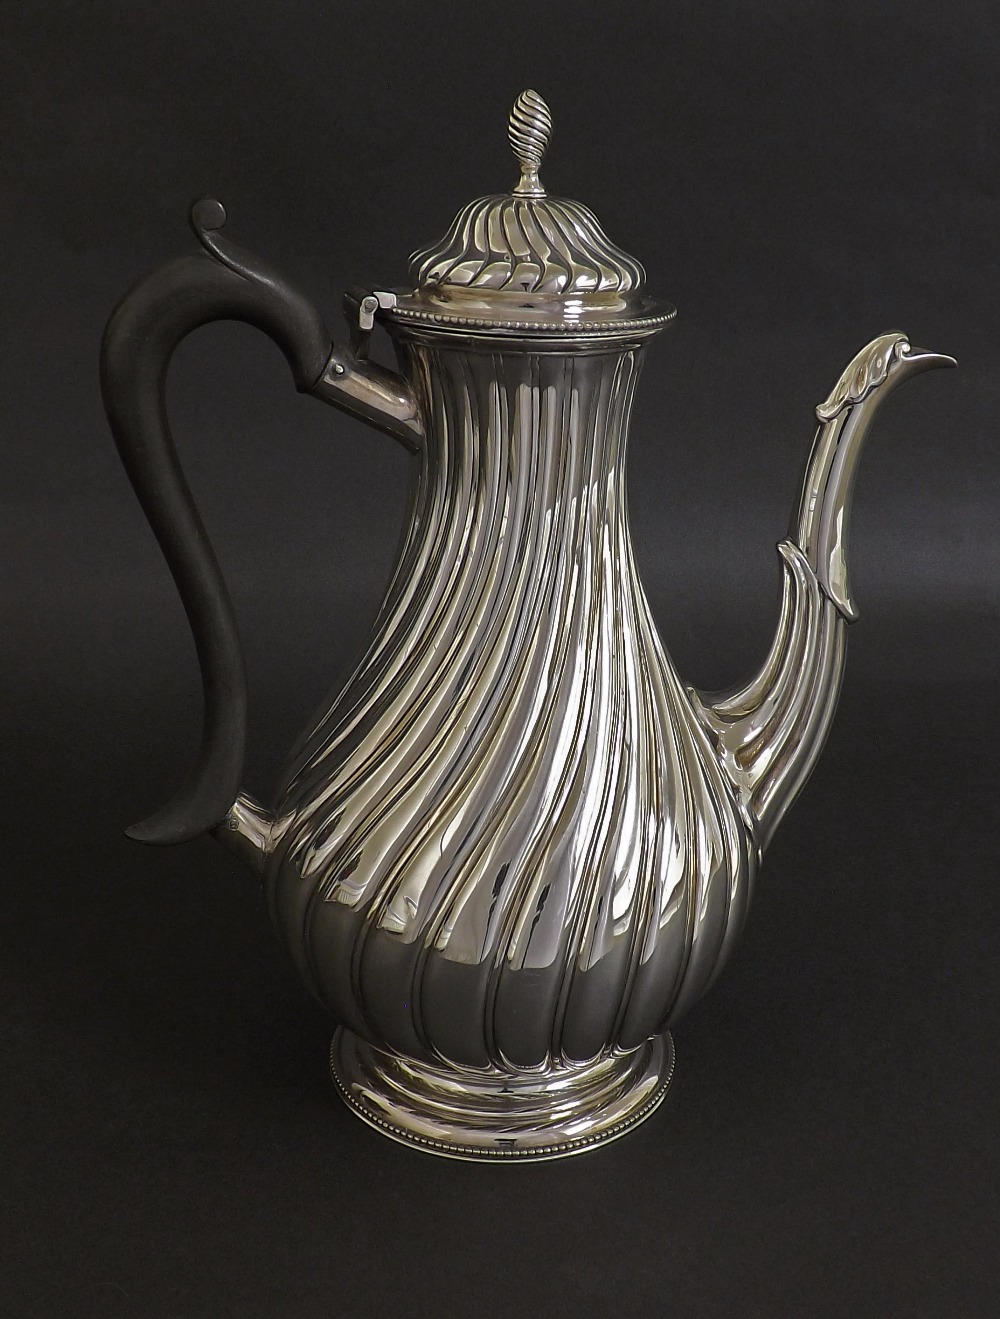 Antique silver plated wrythen fluted coffee pot, 11" high